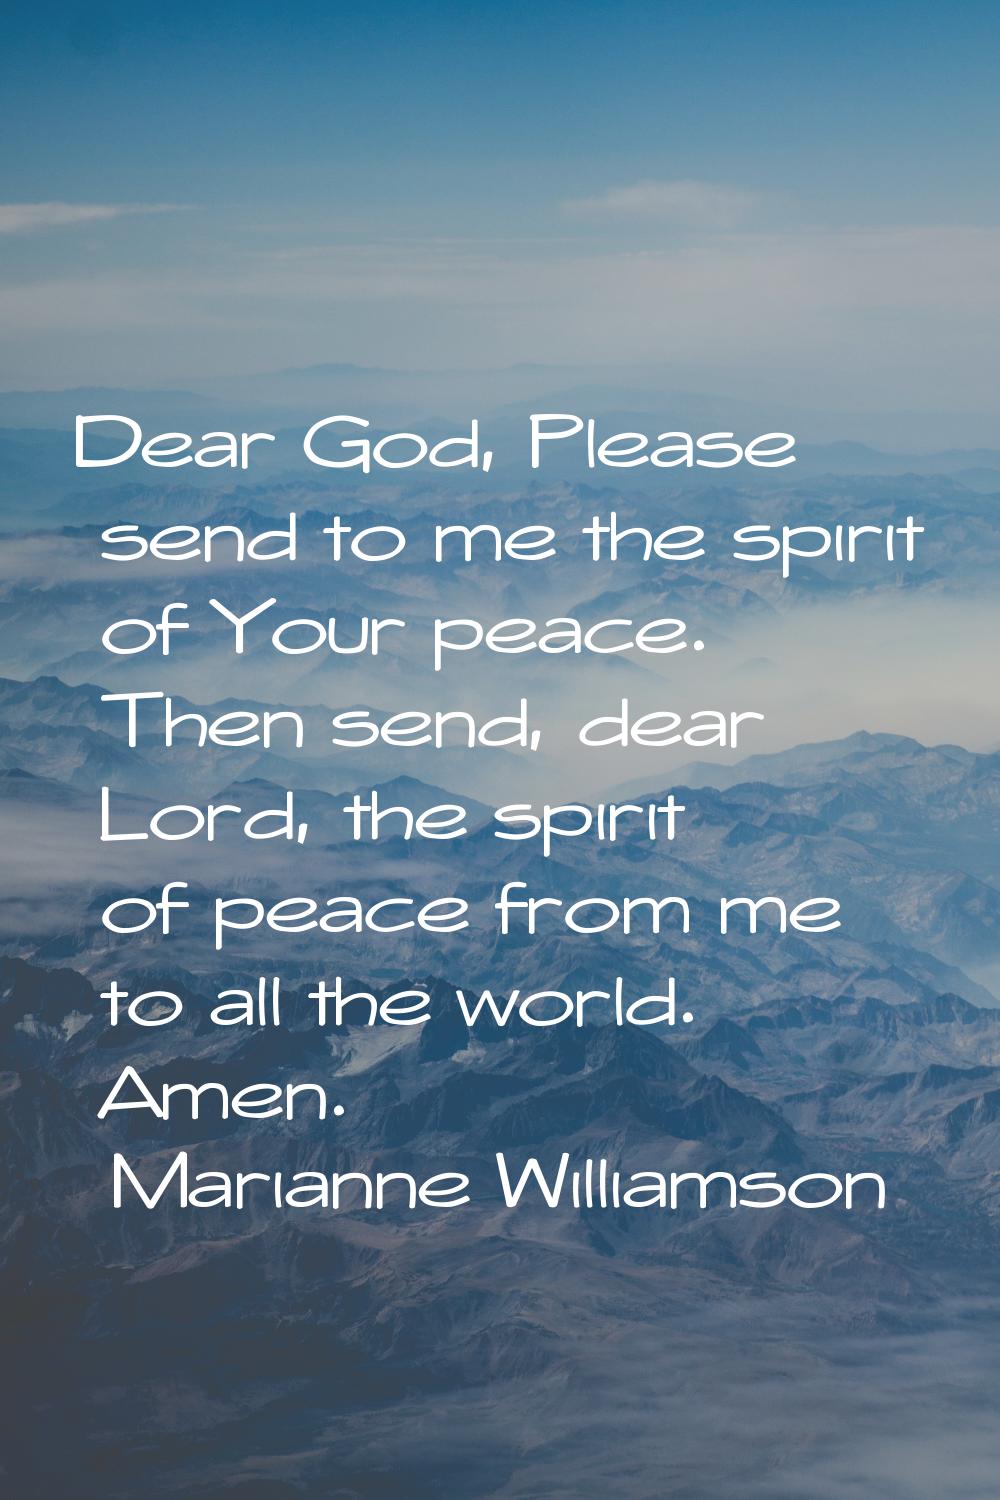 Dear God, Please send to me the spirit of Your peace. Then send, dear Lord, the spirit of peace fro